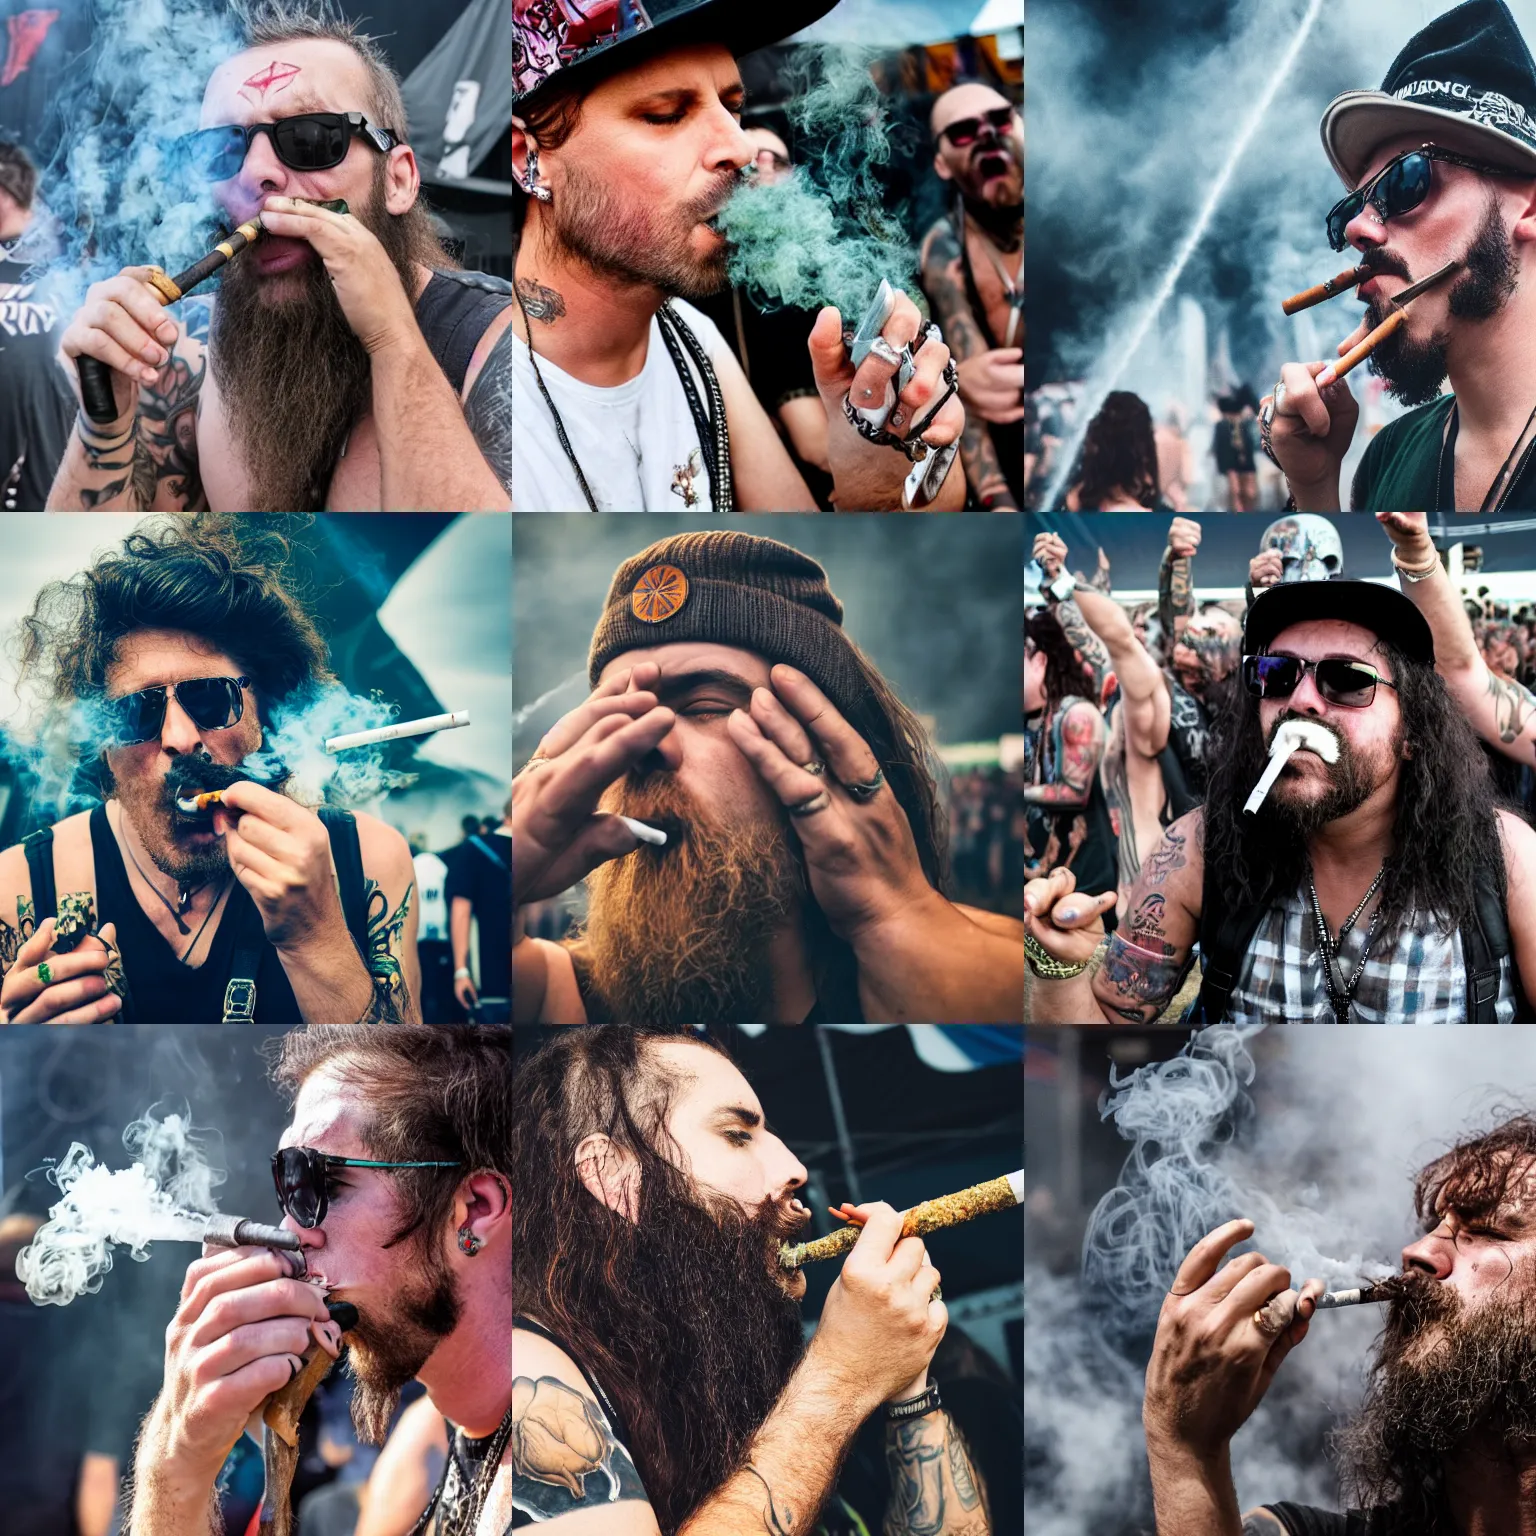 Prompt: a photo of a man smoking weed at a heavy metal festival